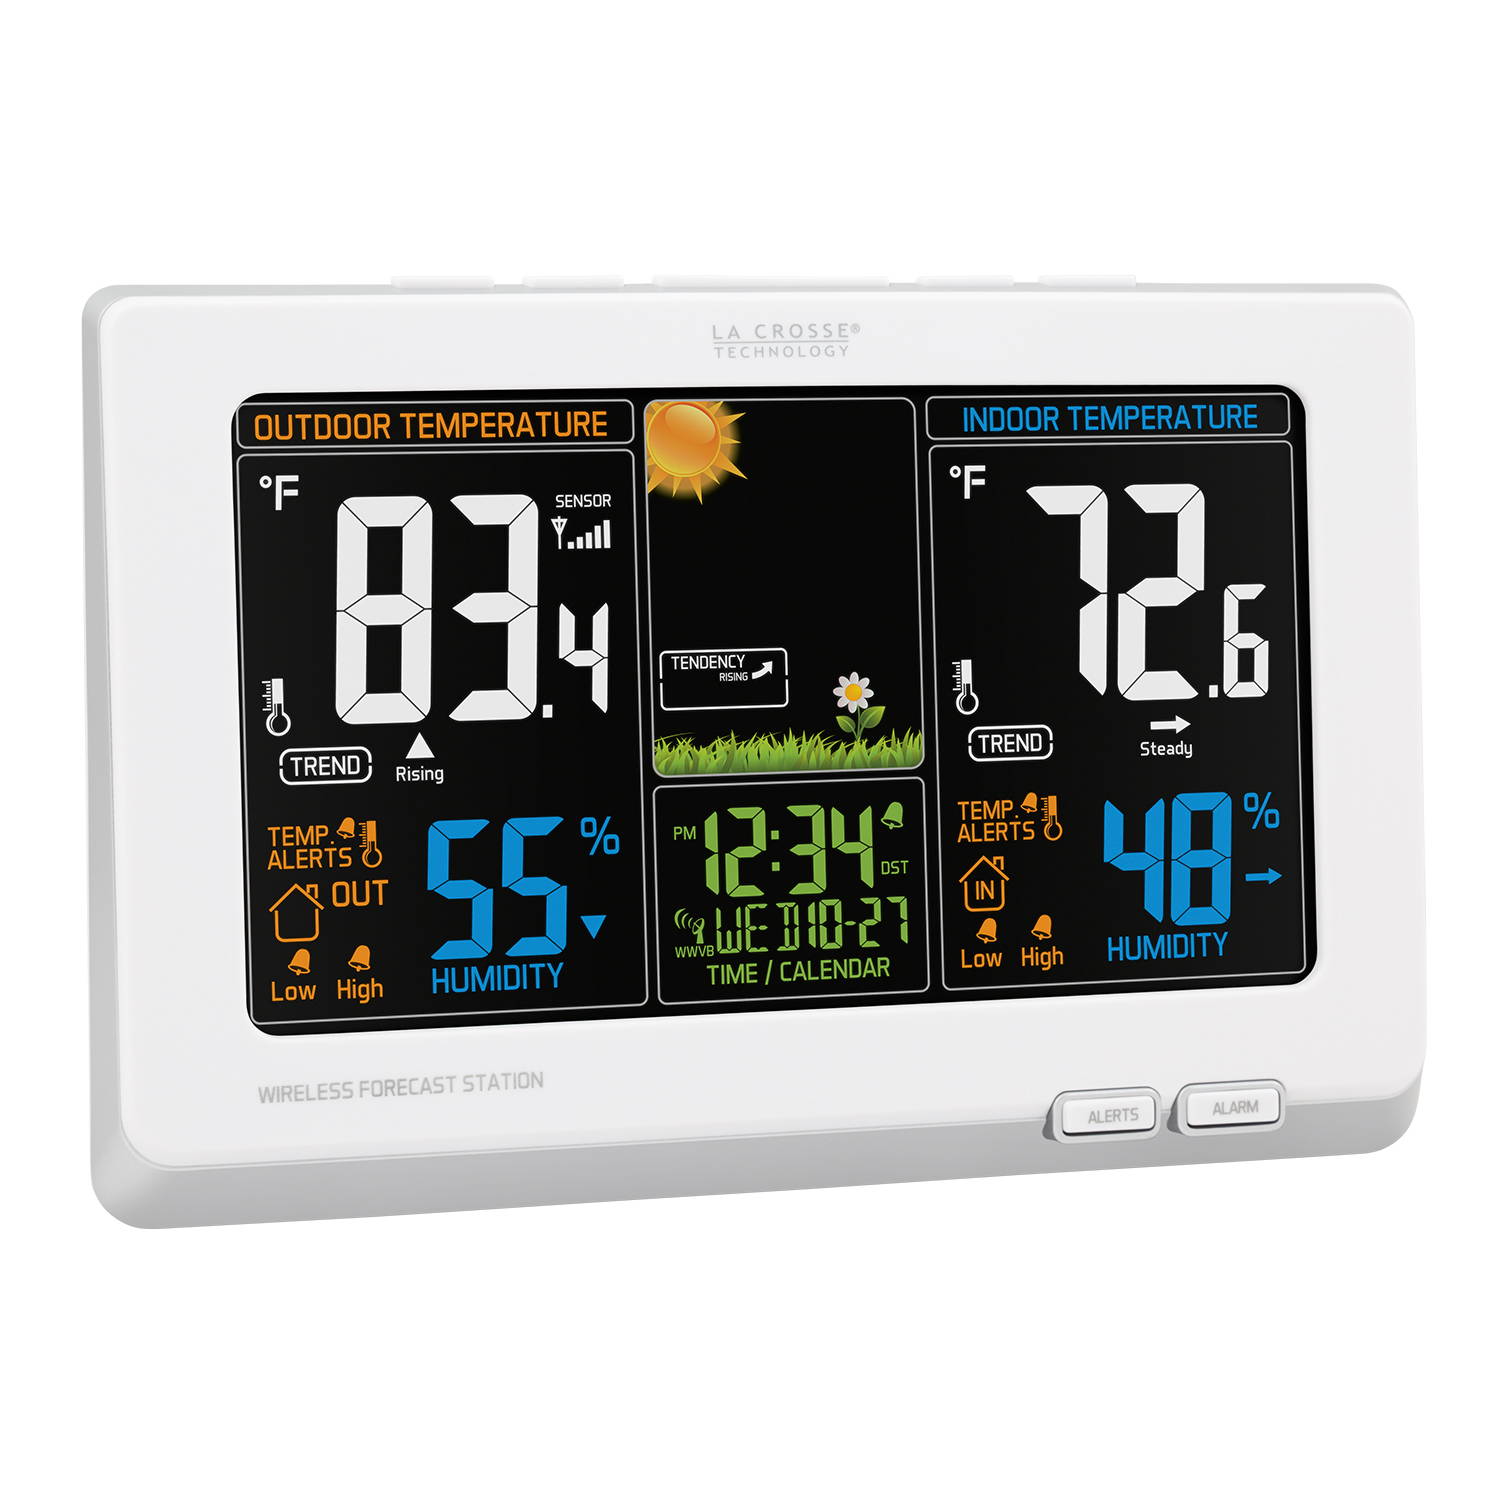 Outdoor Thermometer Weather Station RV Camper - $11.69